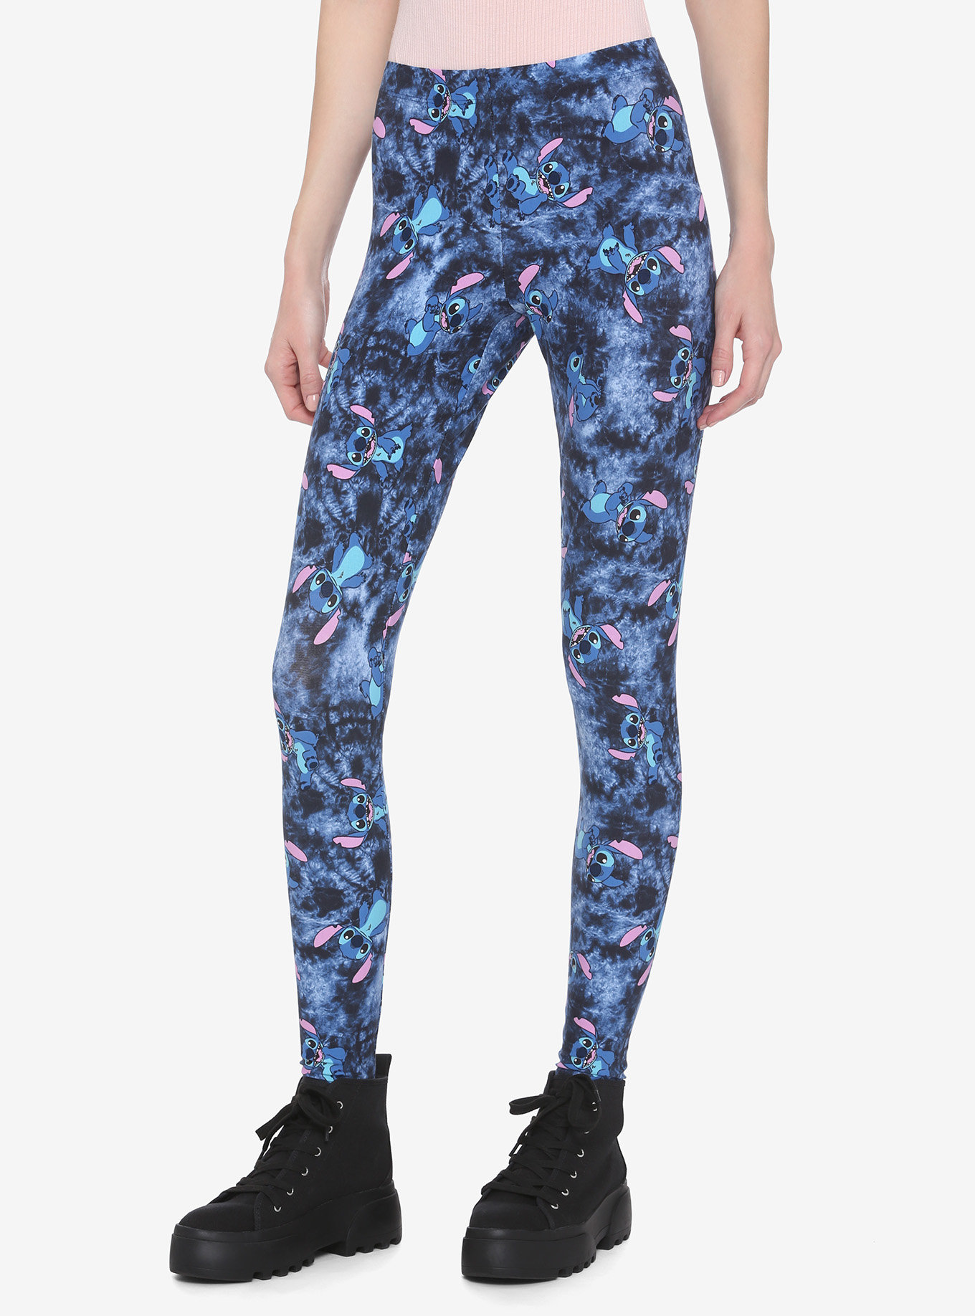 Stay Cute and Comfy While Working from Home in these Disney Leggings